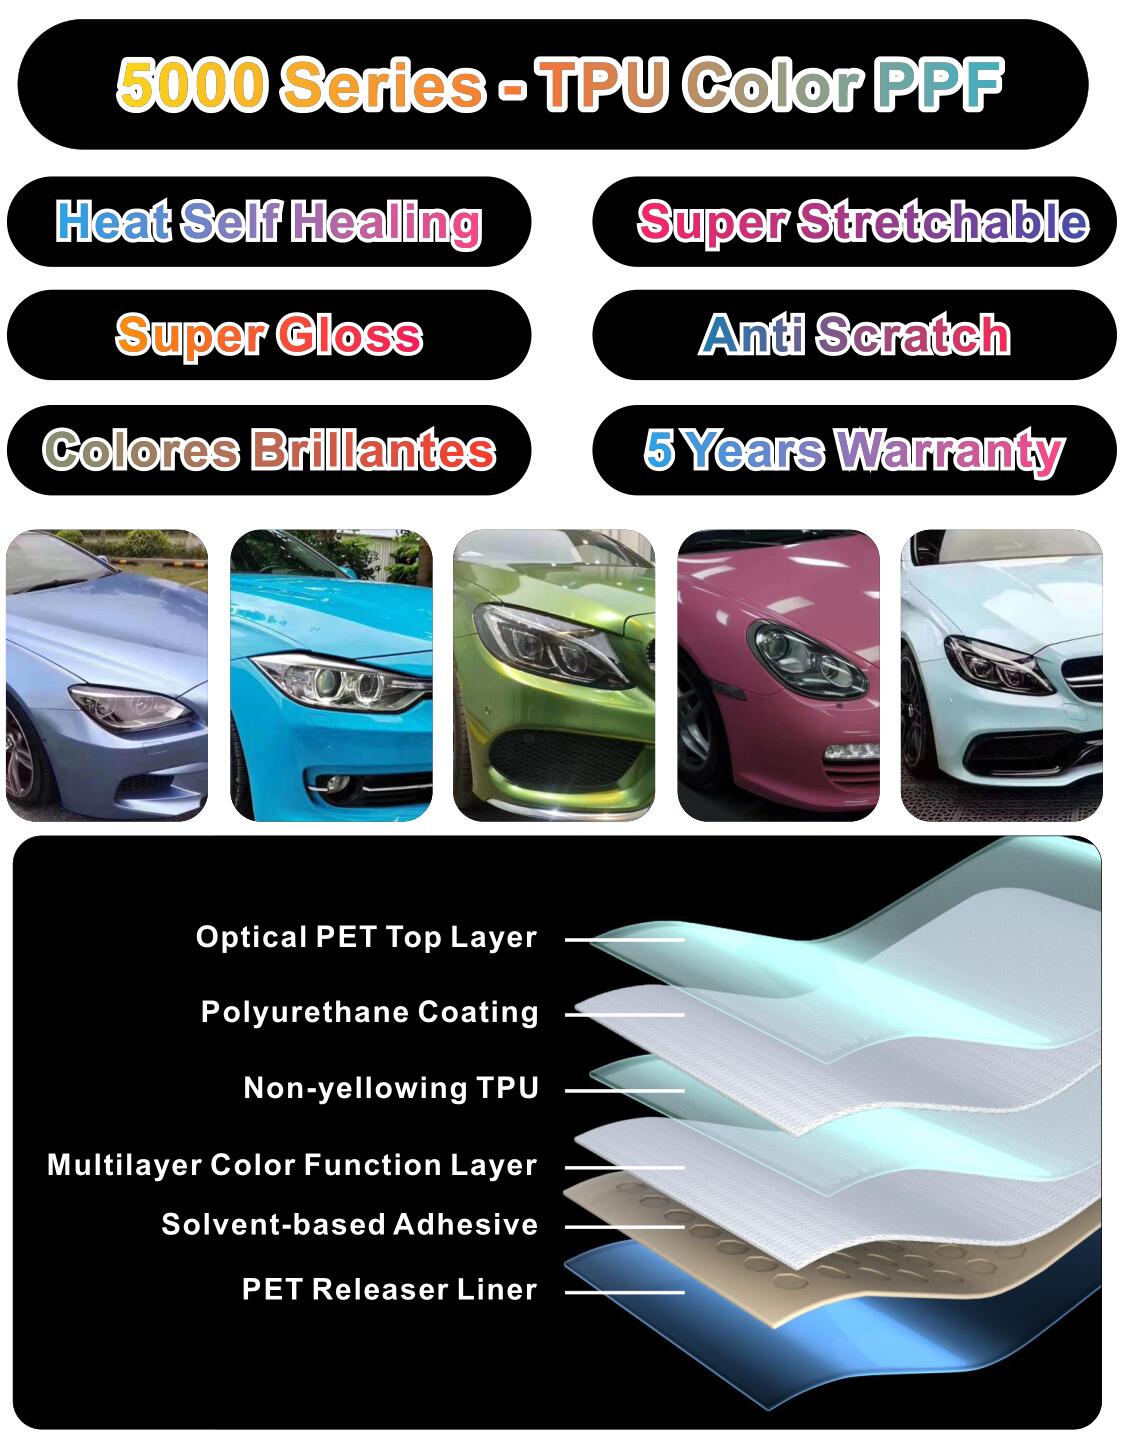 Colored TPU PPF Car Paint Protection Film Supplier - SINO VINYL